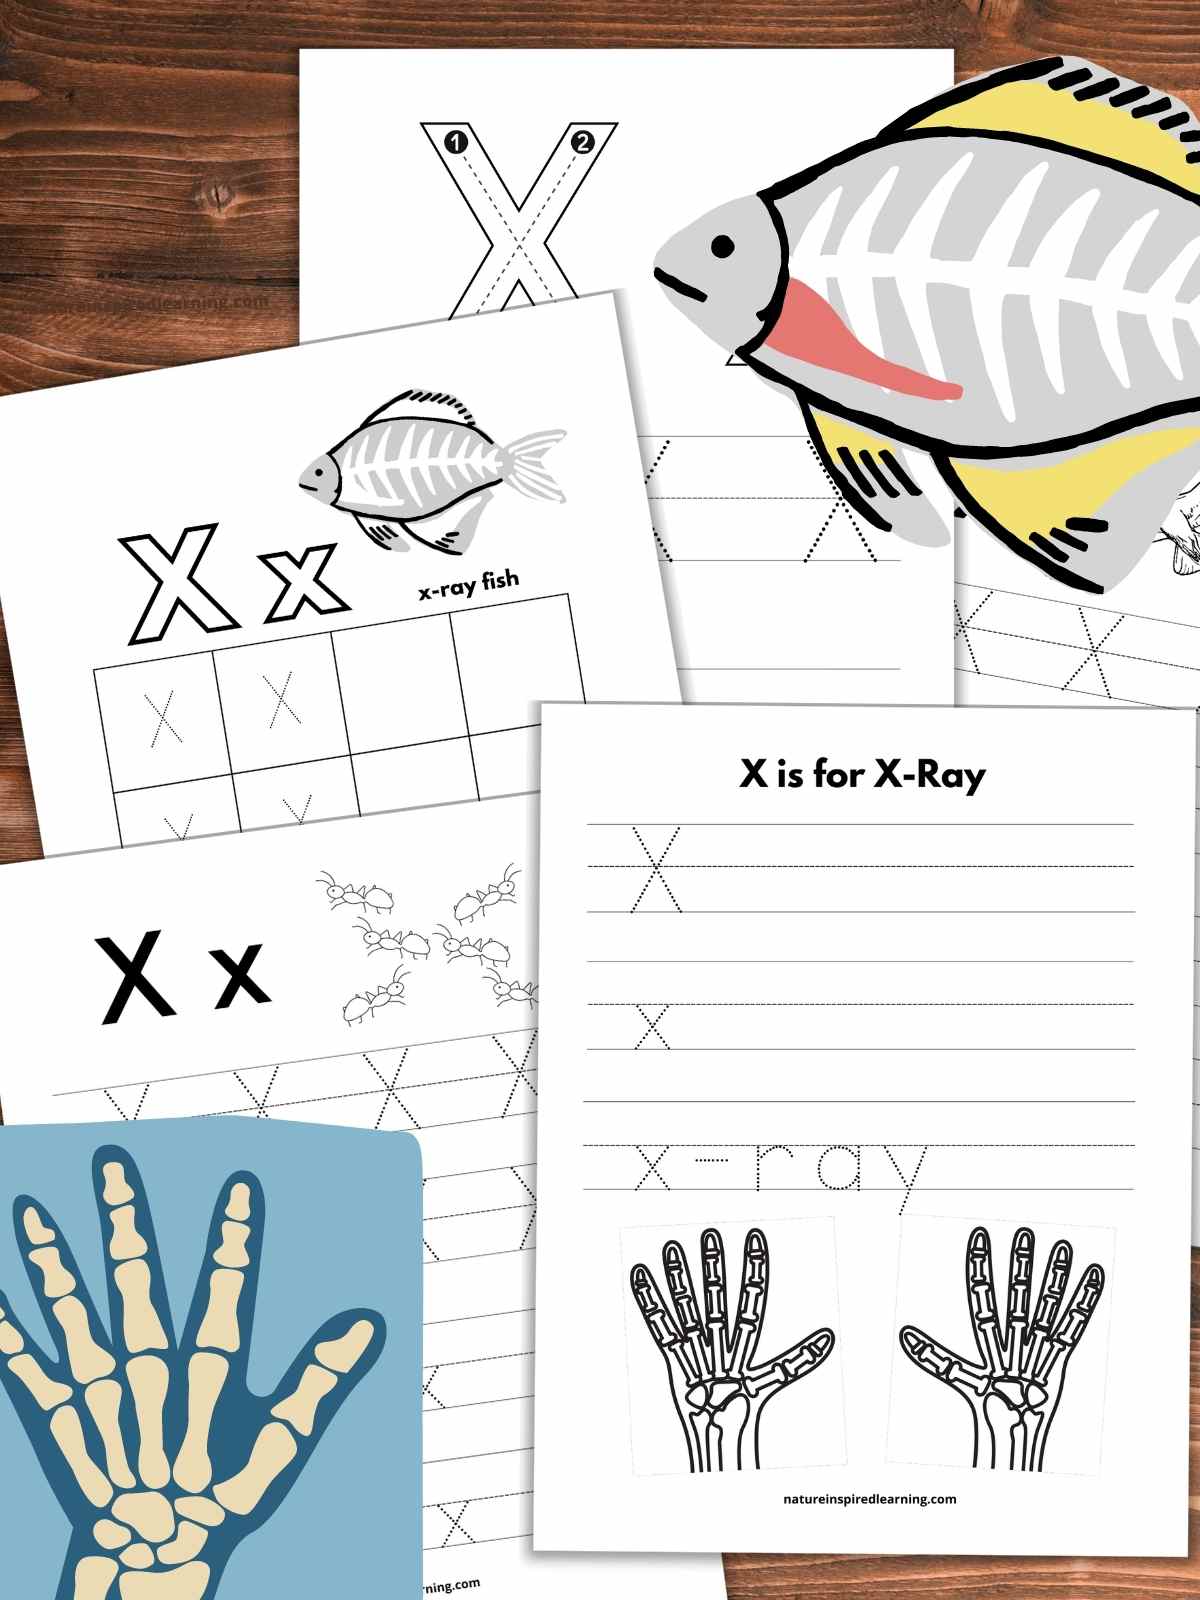 five letter tracing worksheets overlapping on a wooden background with an x-ray fish upper right and x-ray of a hand lower left